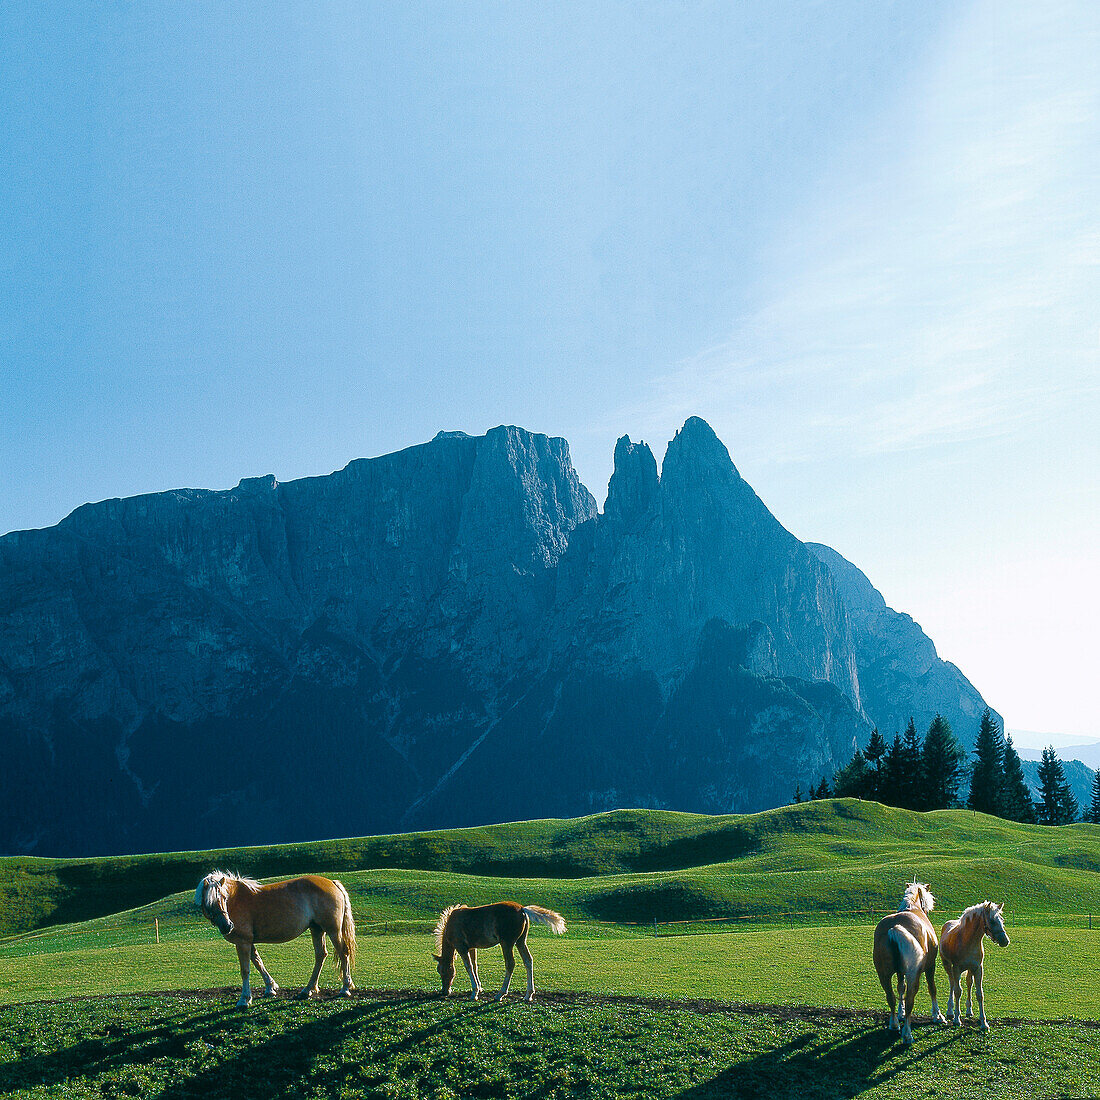 Horses on an alpine meadow in the sunlight, Alpe di Siusi, South Tyrol, Italy, Europe